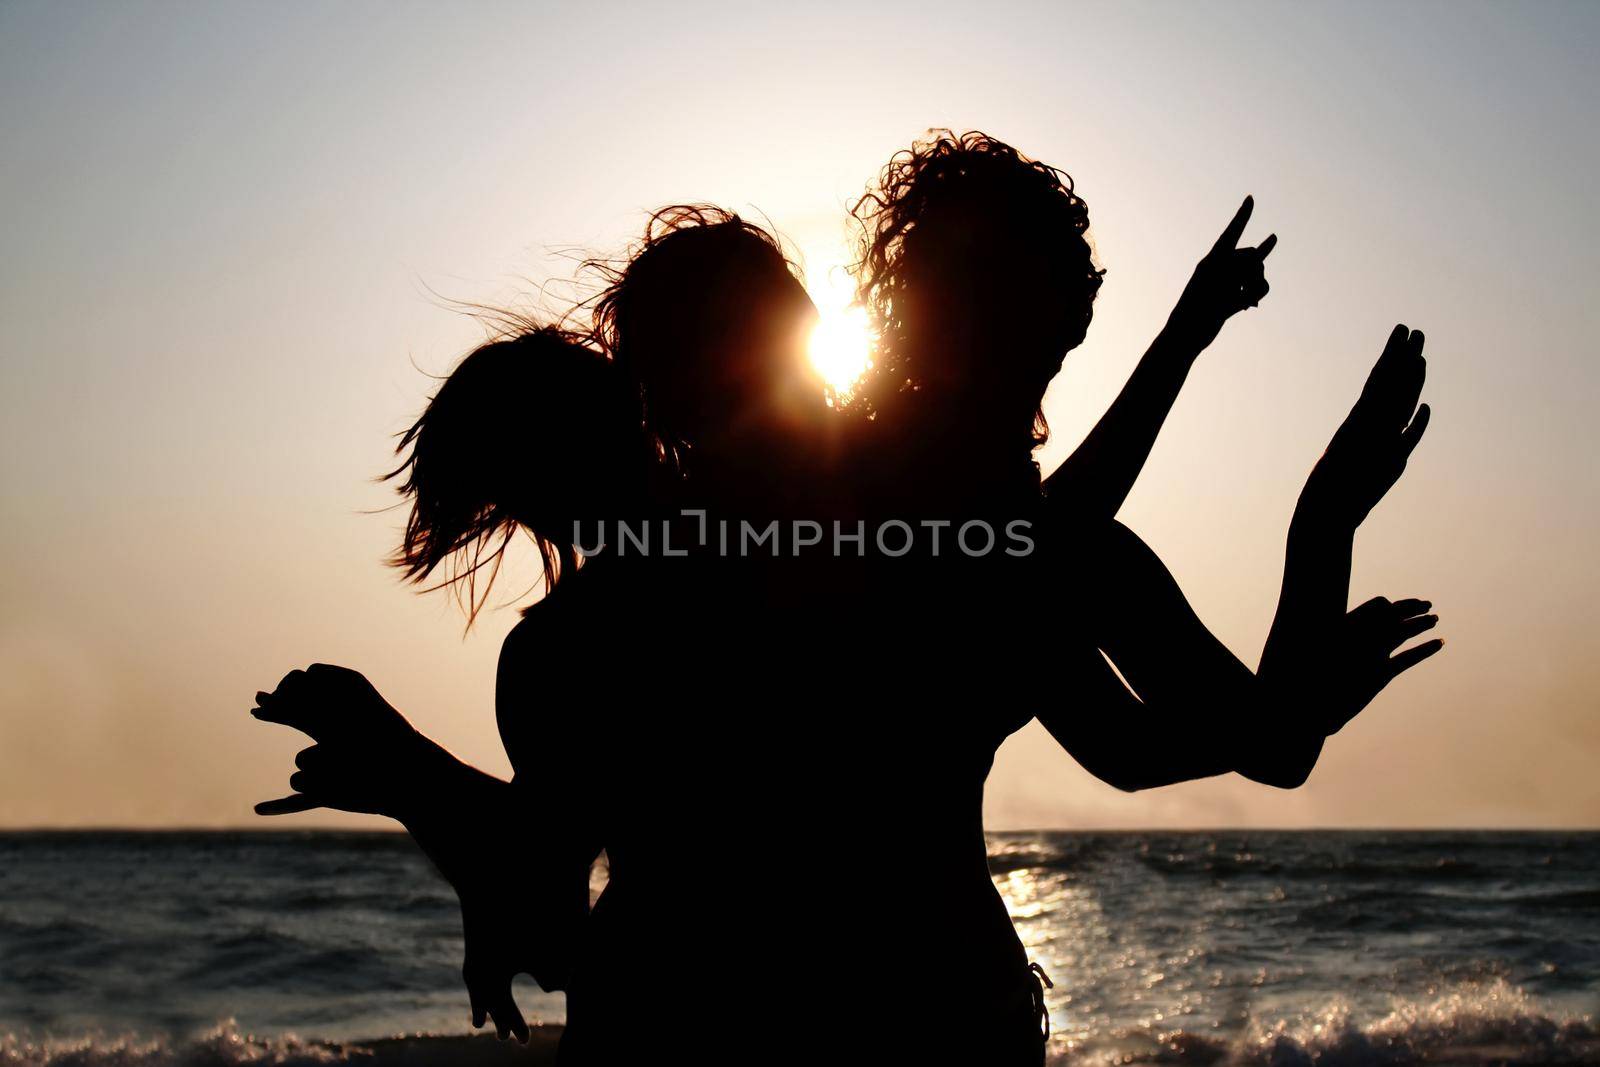 Group of young women having fun on the beach at sunset. Girls si by dmitryz